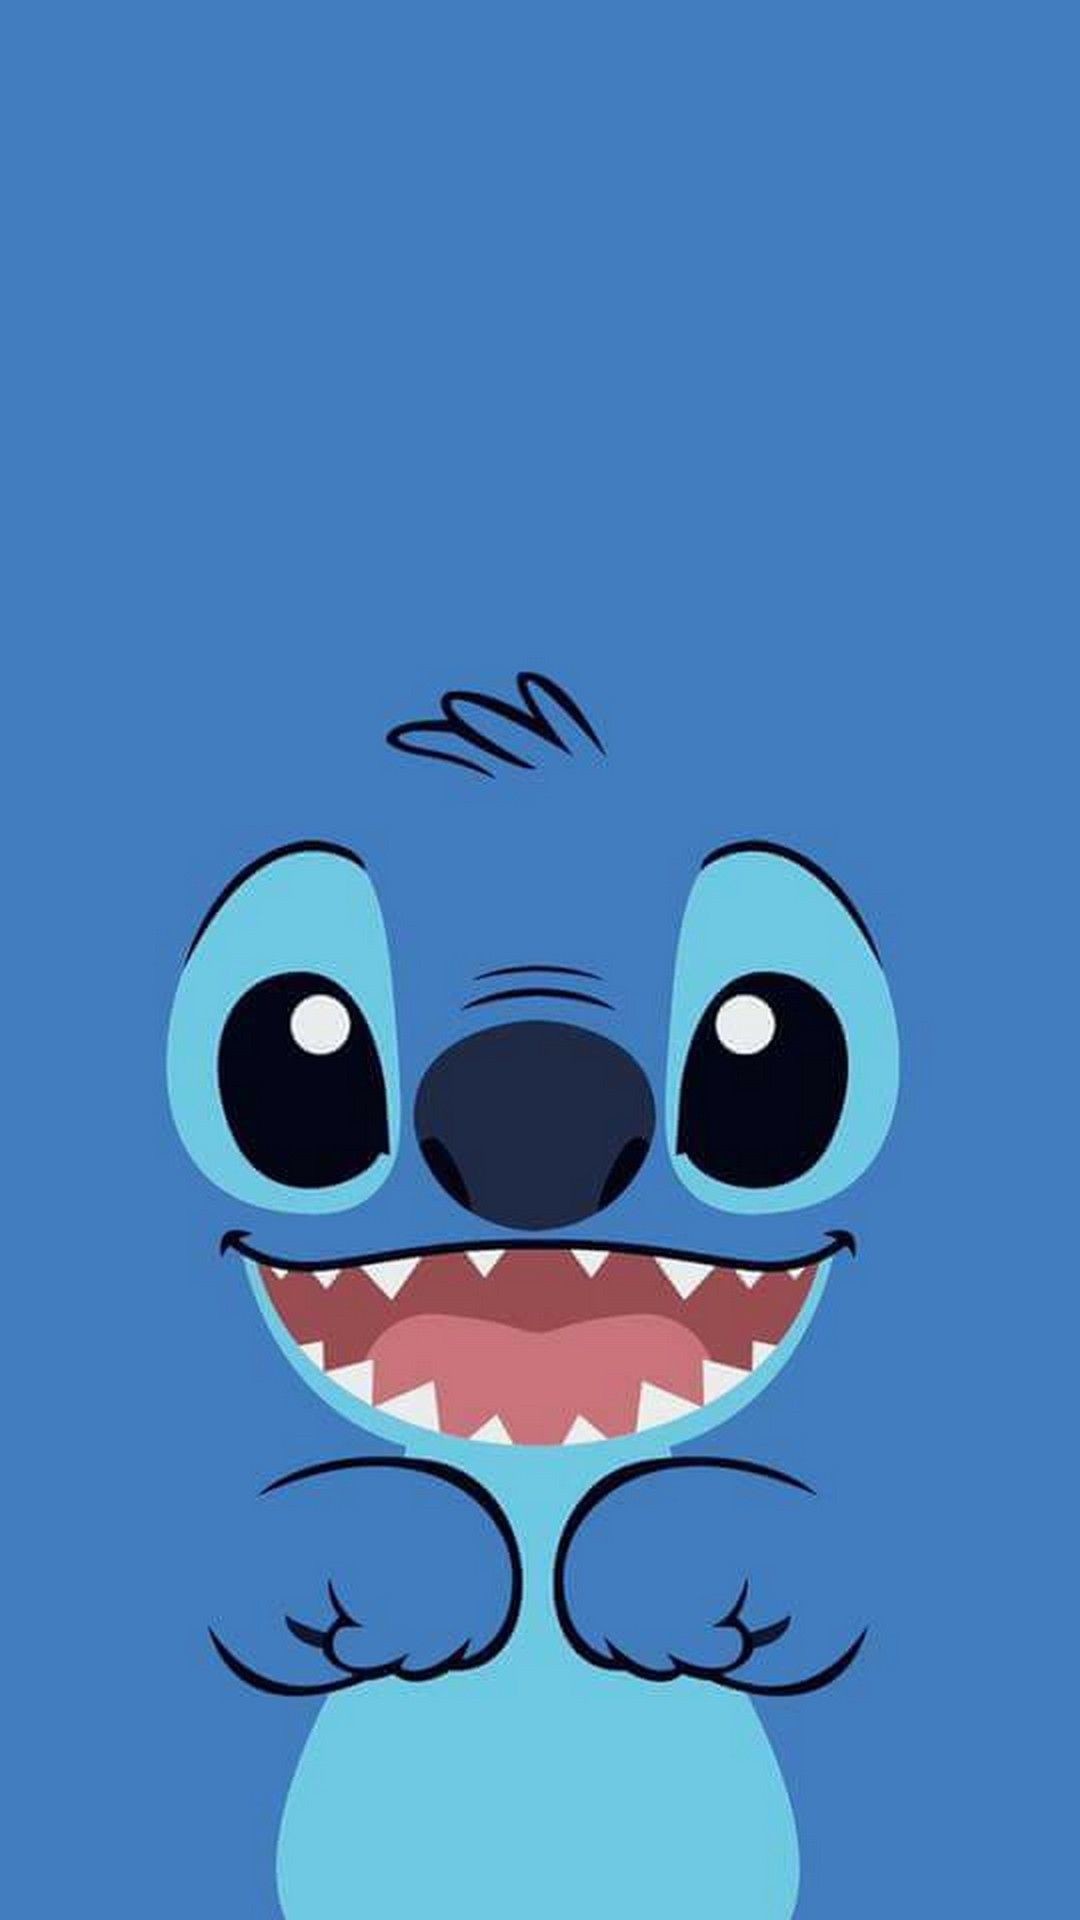 1080x1920 Stitch Disney Wallpaper For Mobile Android | Best HD Wallpapers